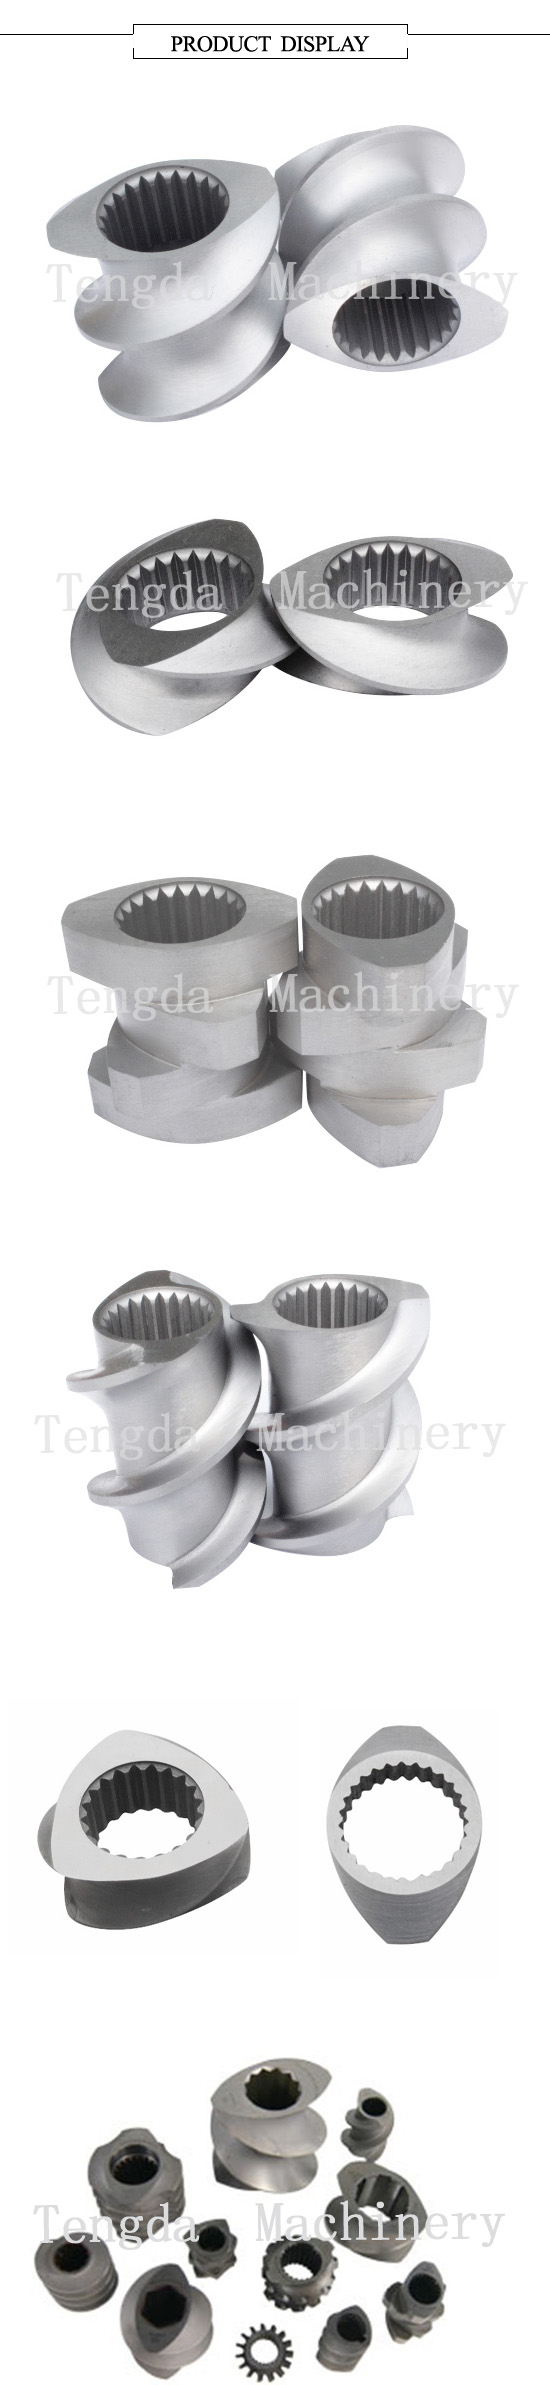 Ce Spare Part Screw for Nanjing Tengda Double-Screw Plastic Extruder